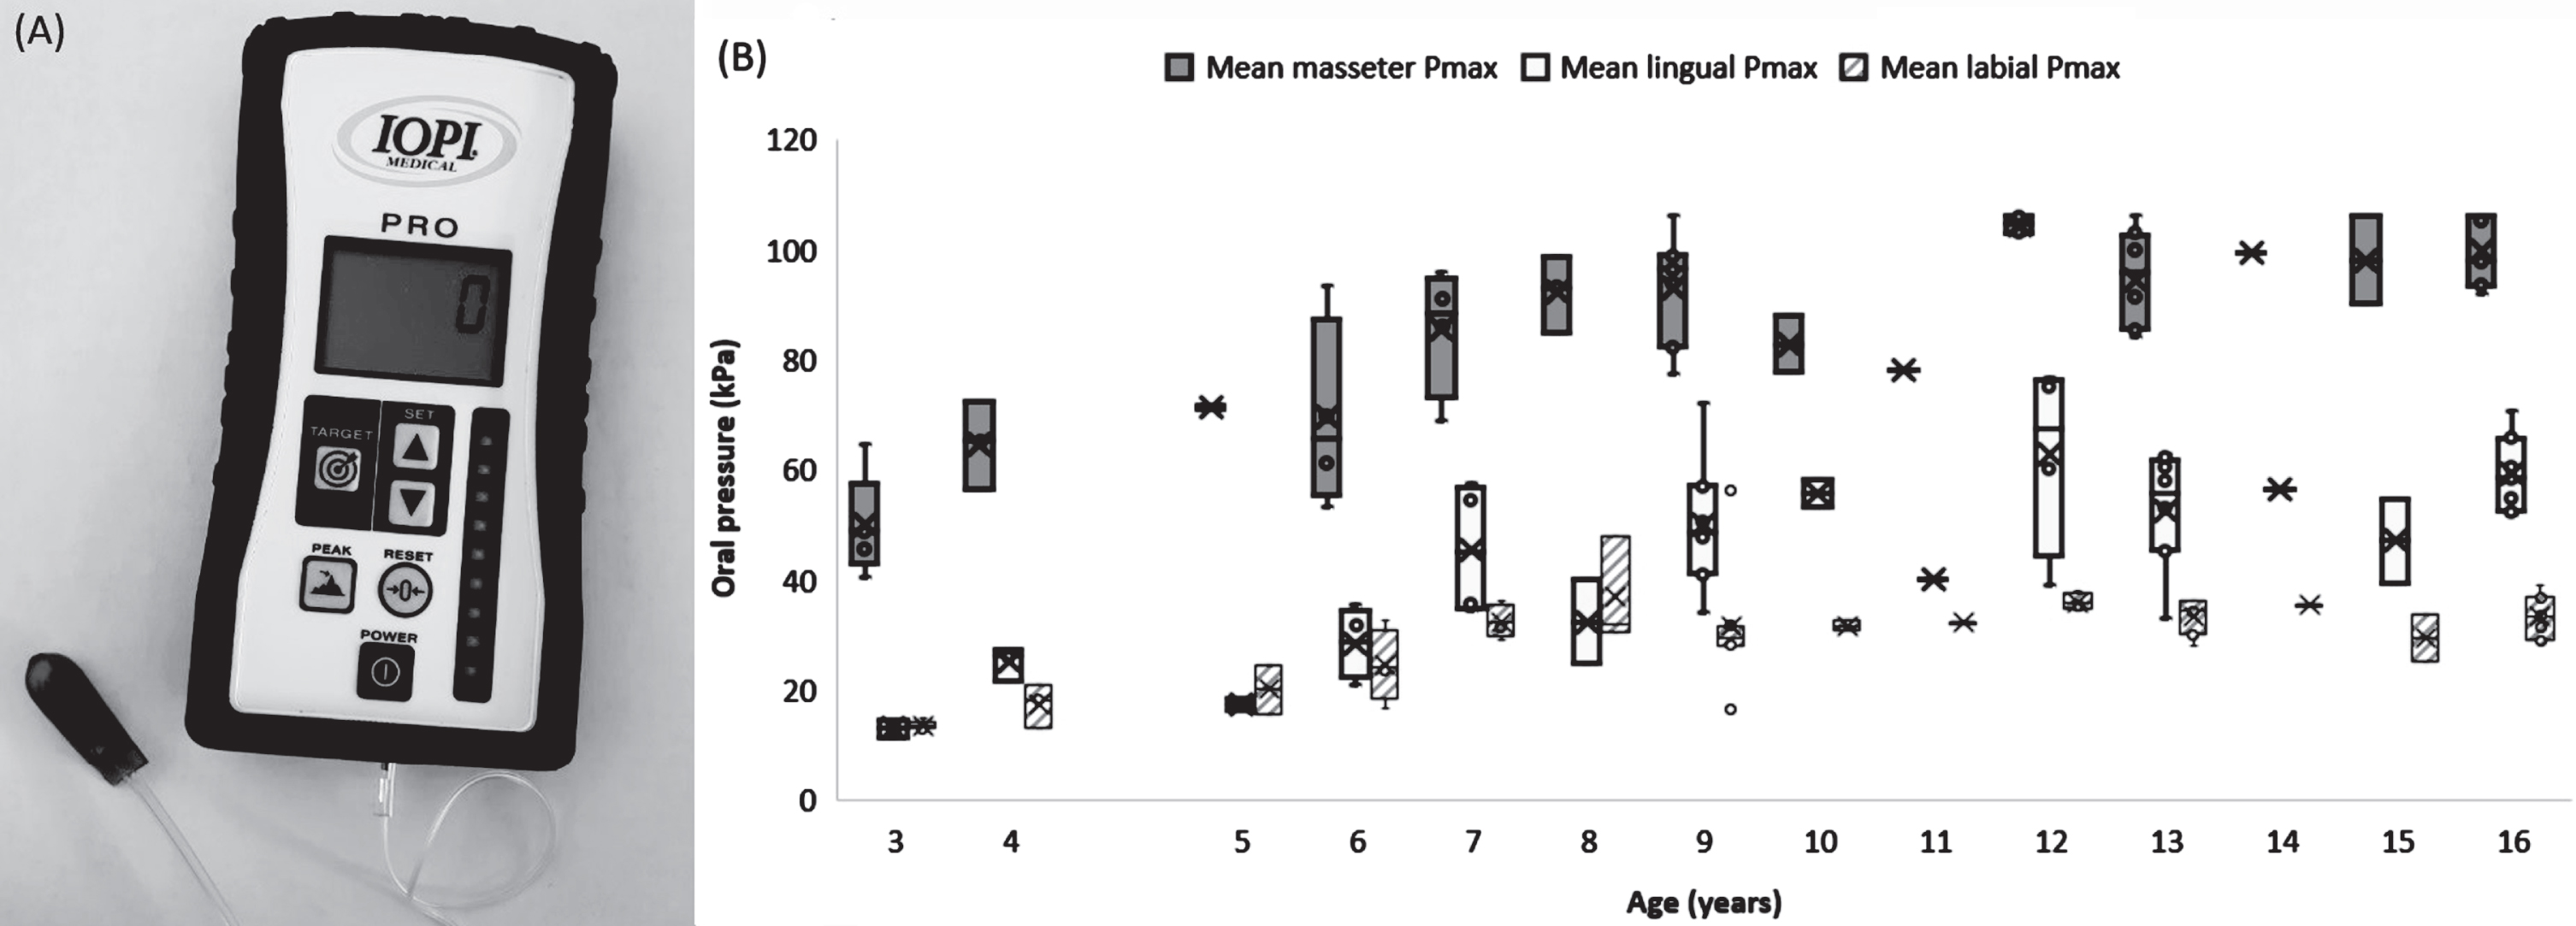 Iowa oral performance instrument (A) and boxplot representation of the maximal mean oral pressures (Pmax) as a function of age in the control group (n = 53) (B). Boxplot extremes represent the lowest and highest values of the sample. The lowest and highest part of the box represent the first and third quartiles, respectively. The crosses and bars represent the mean and median values of the samples. The age groups with only one patient are represented in the form of a “star” with 6 points.